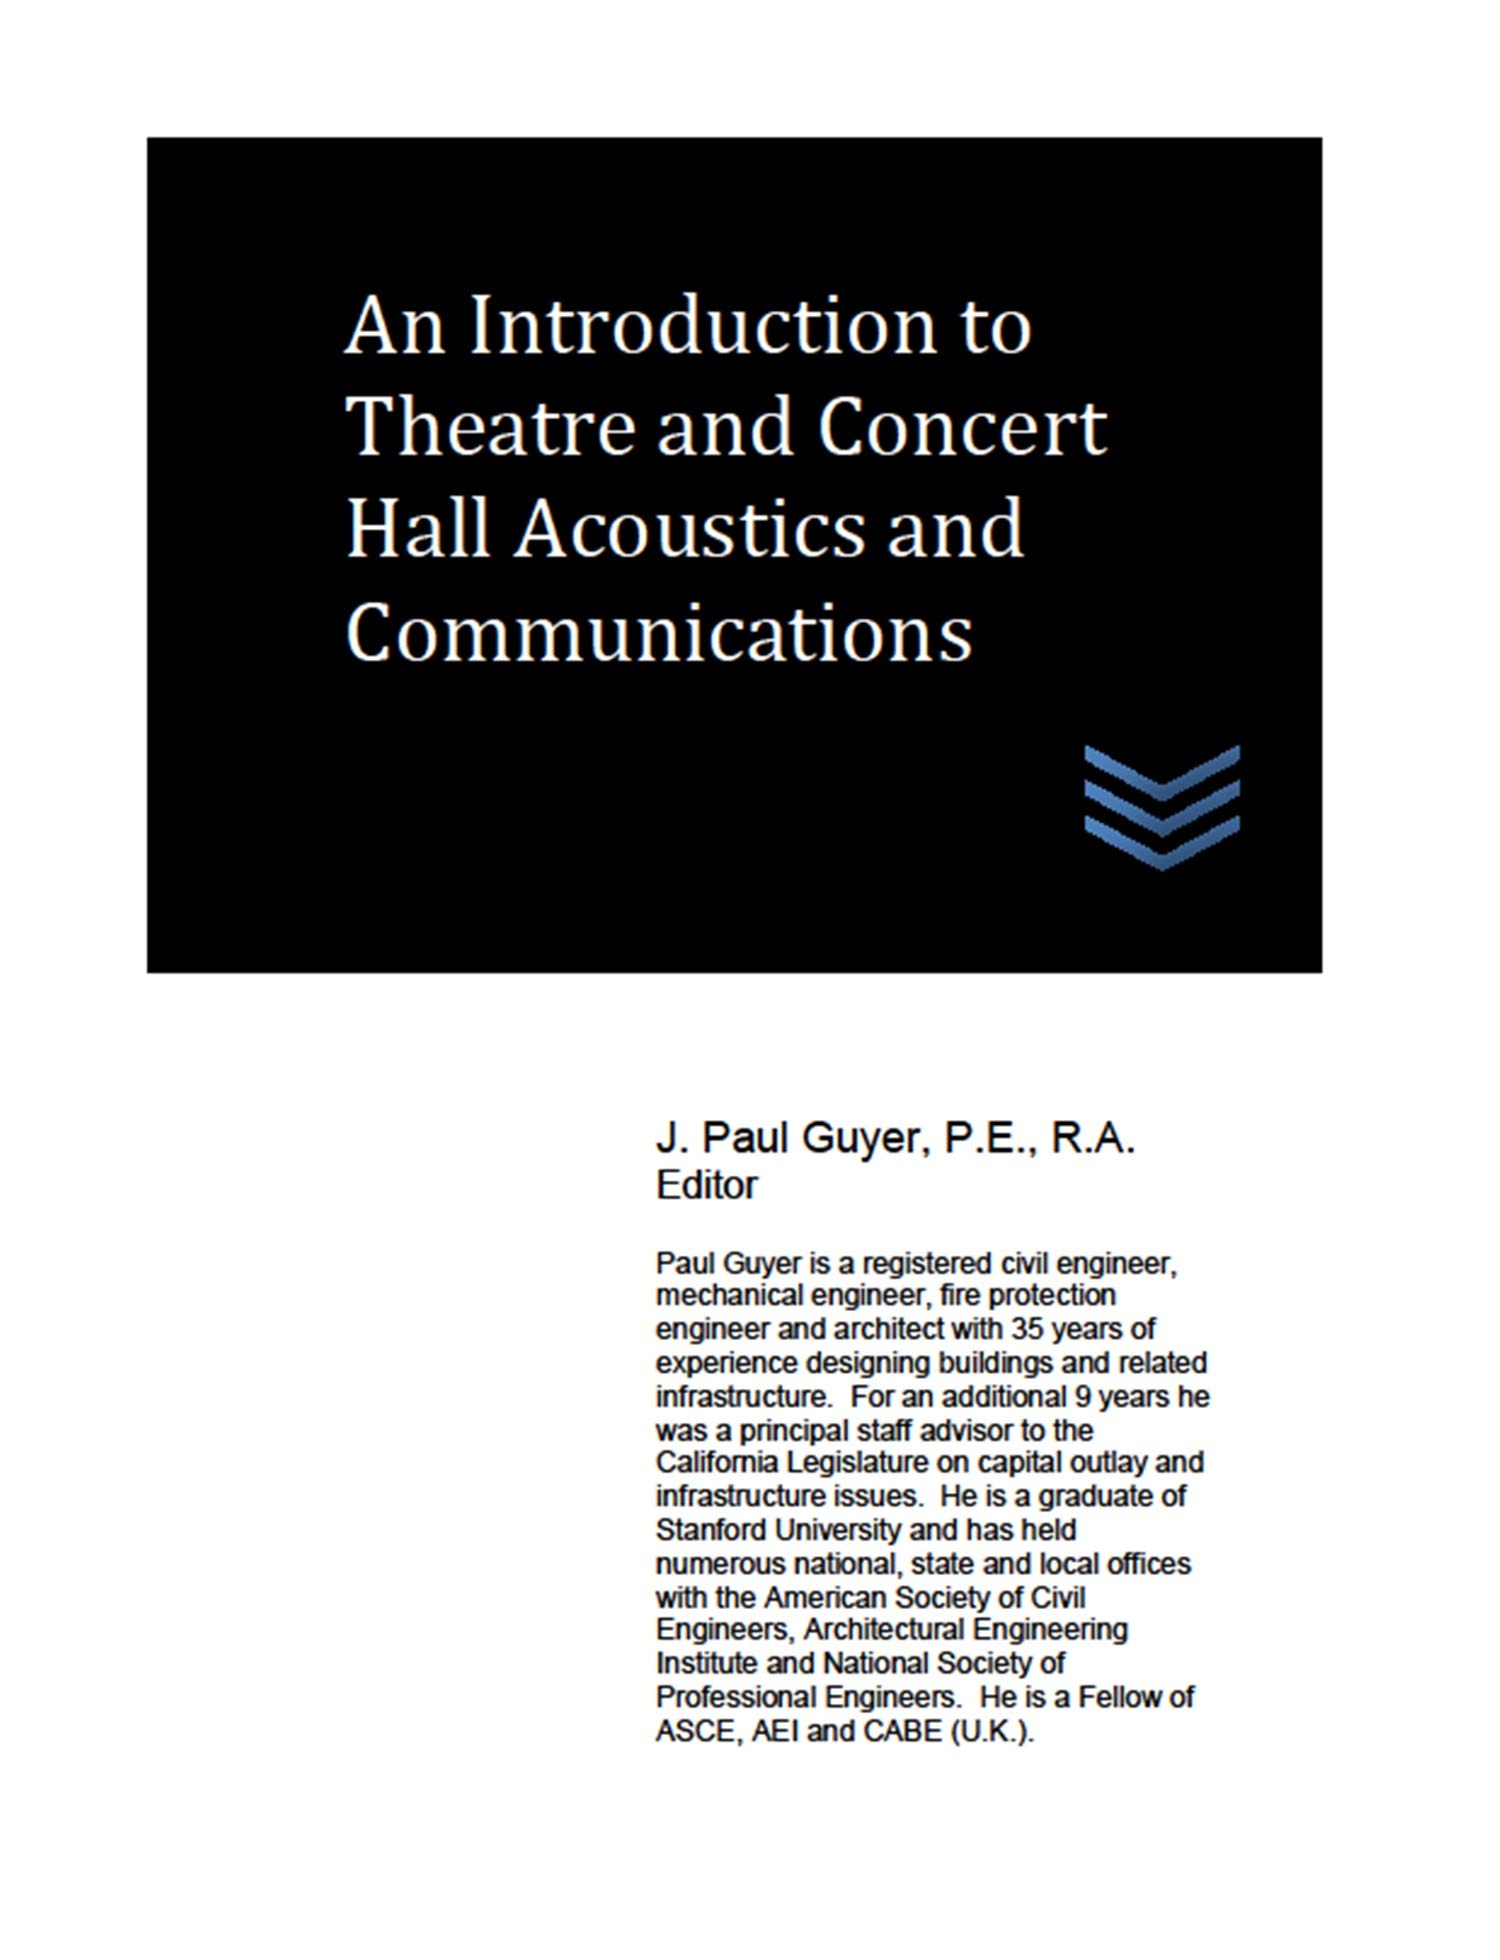 An Introduction to Theatre and Concert Hall Acoustics and Communications (Theatre and Concert Hall Design)